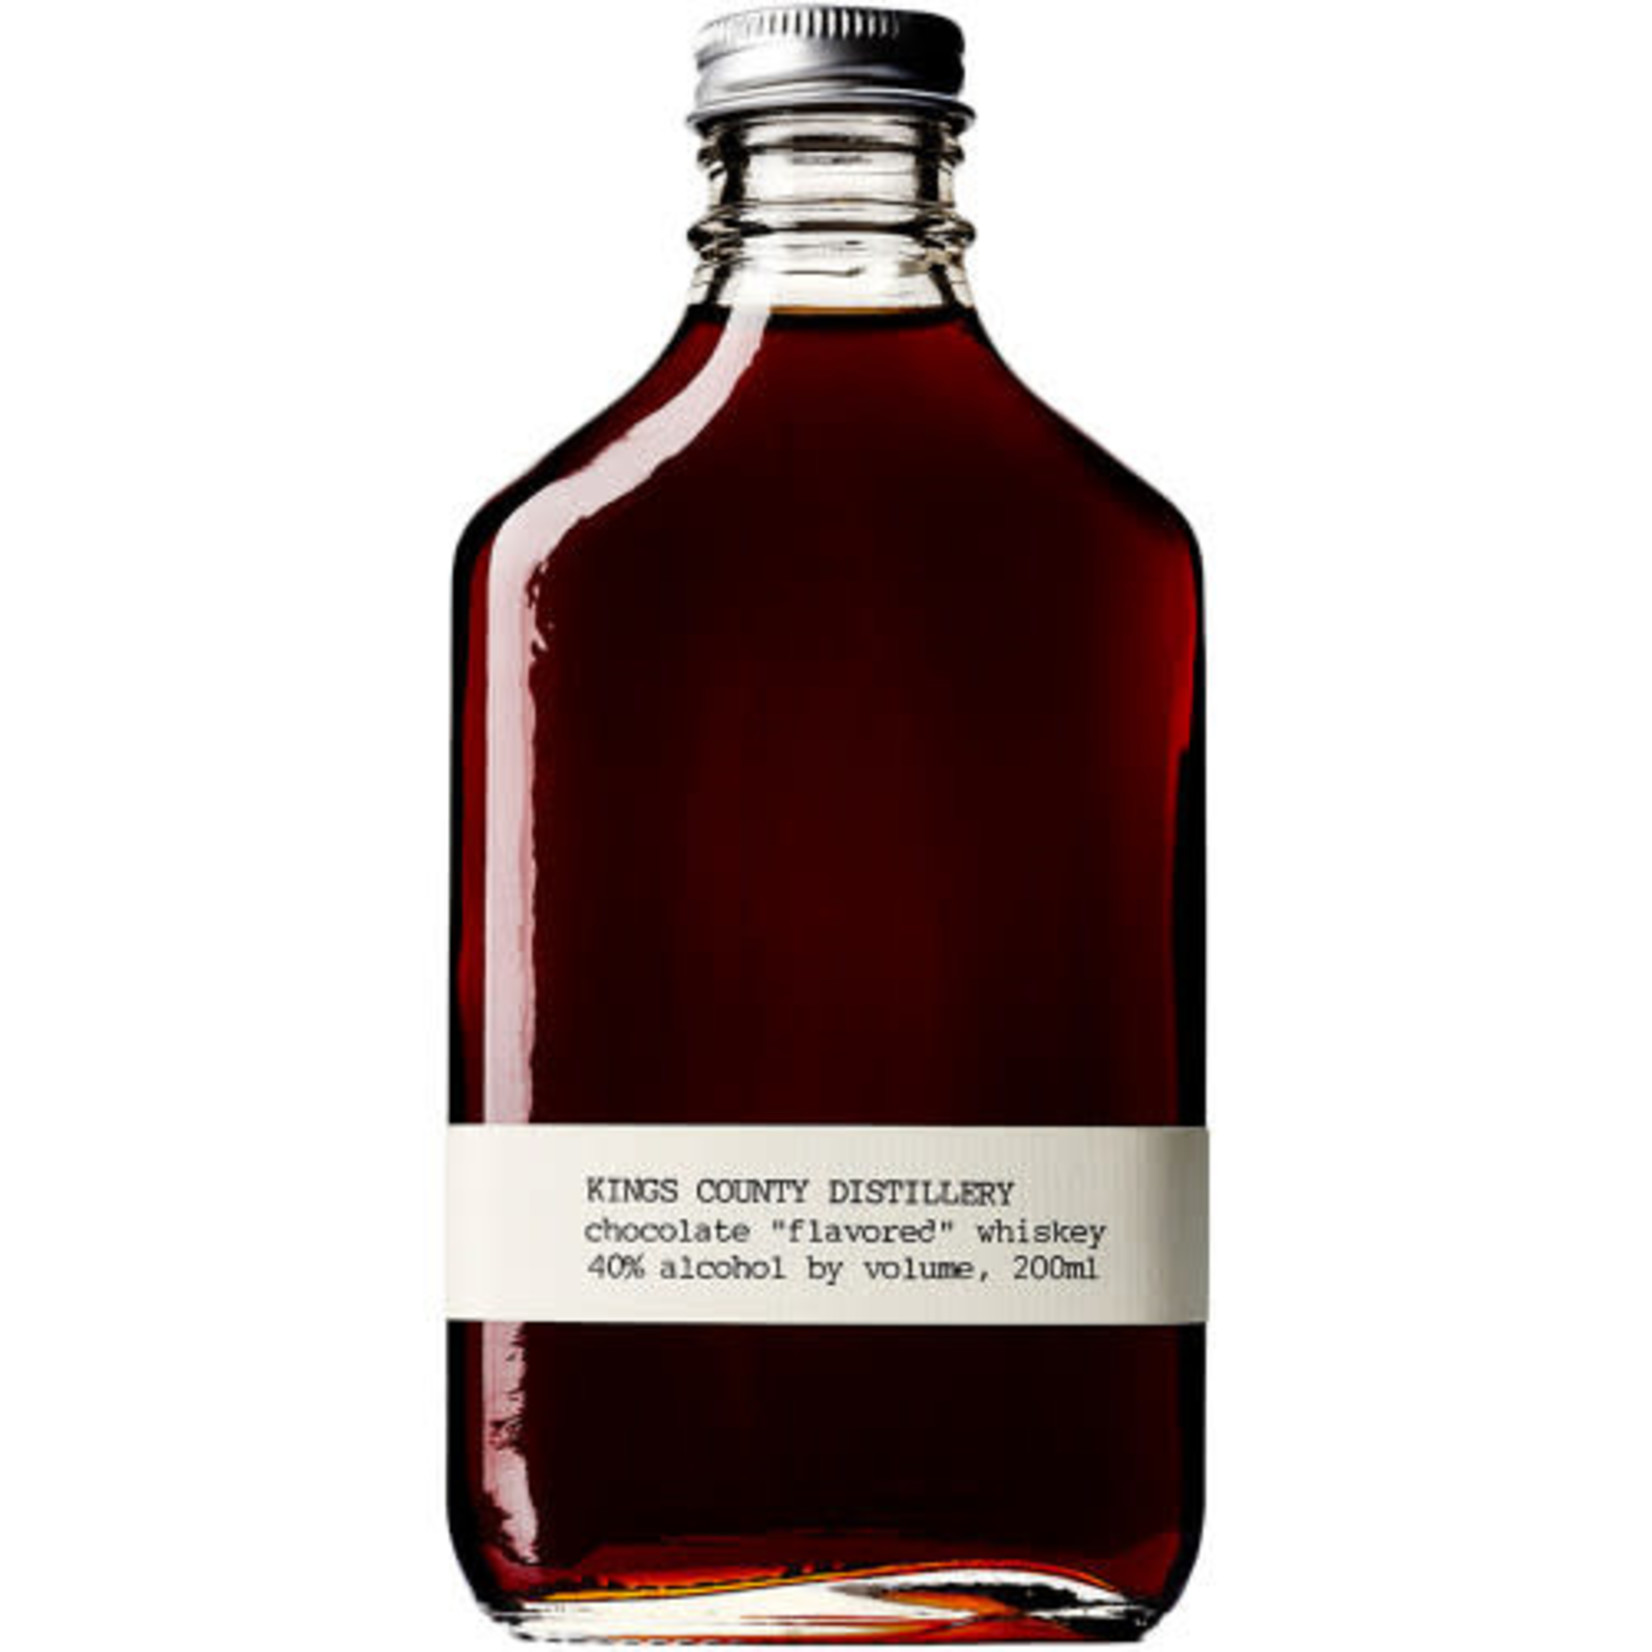 Kings County Distillery, Chocolate "Flavored" Whiskey - 200ml